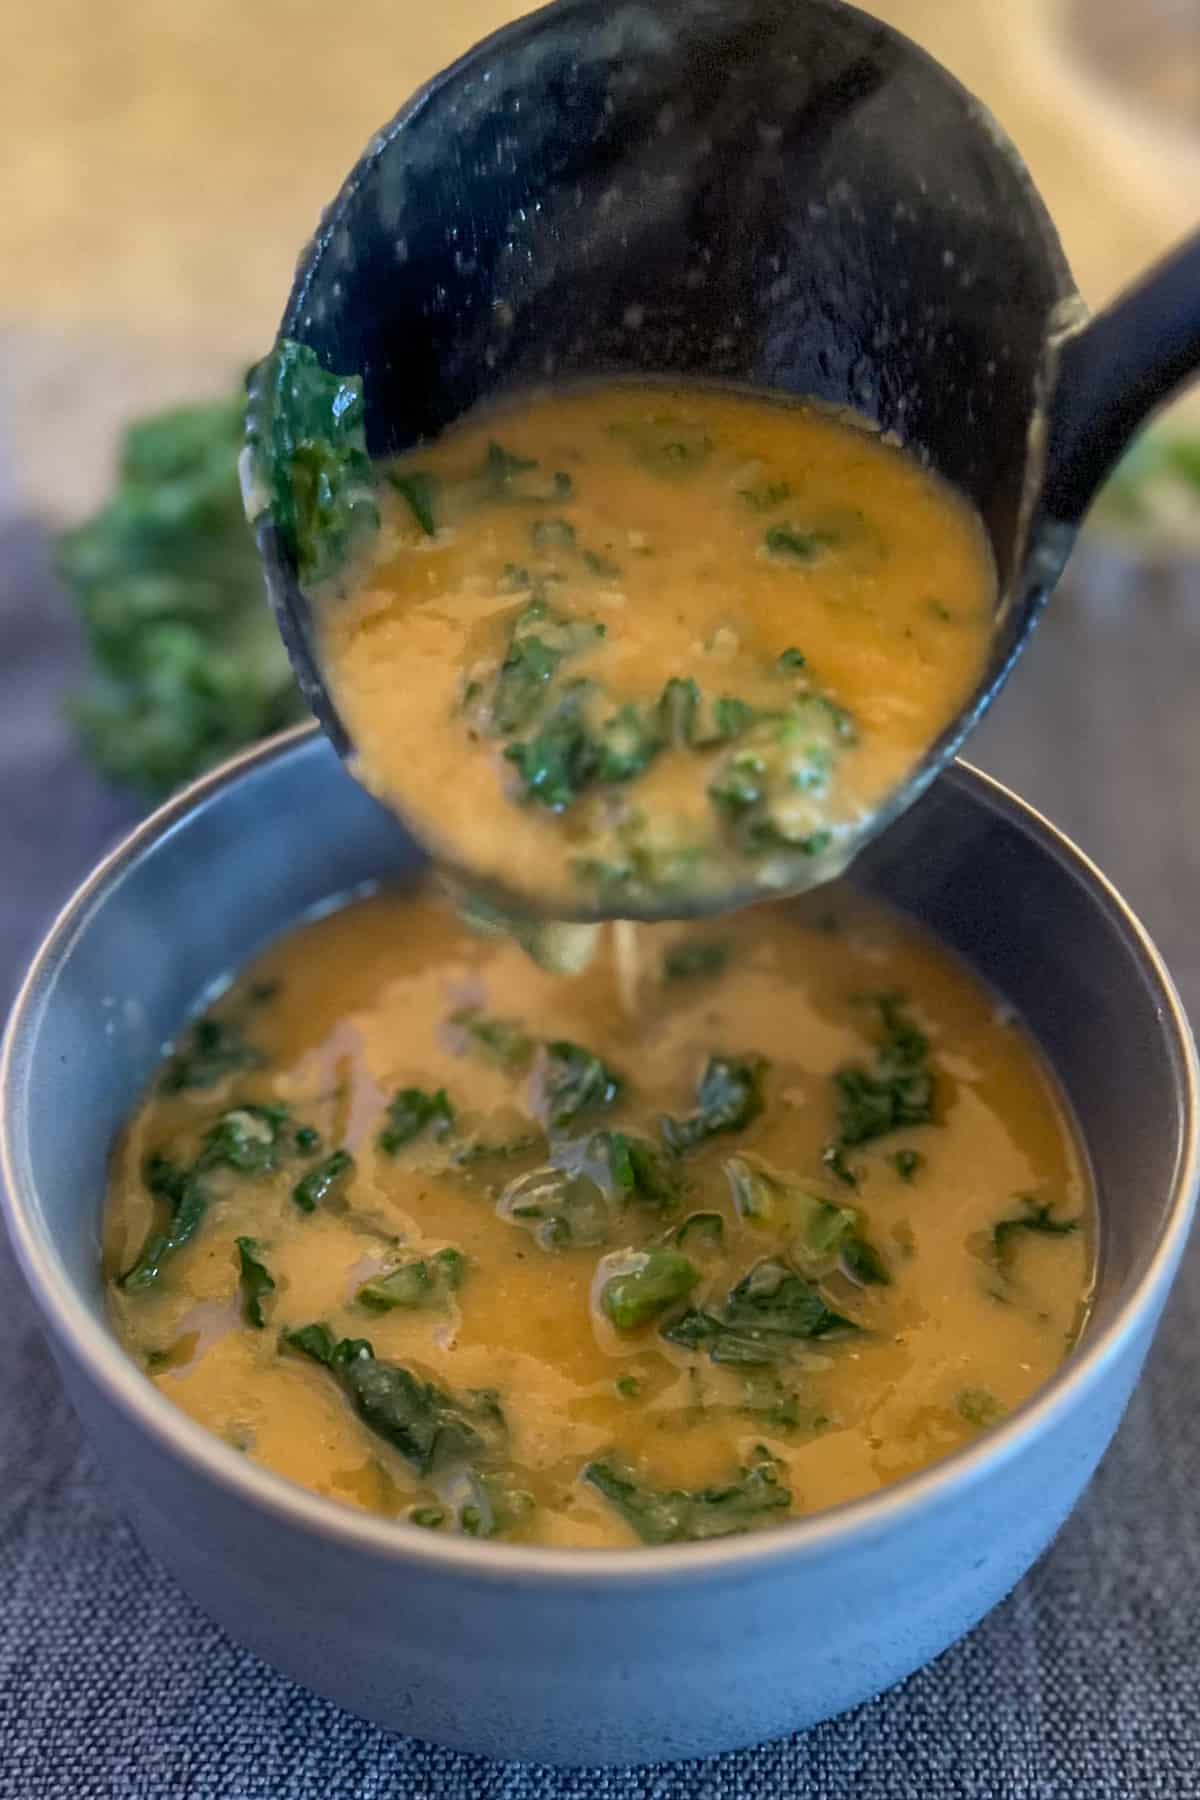 top side view of a blue bowl with white bean and kale soup; black ladle is pouring more hot soup into the bowl